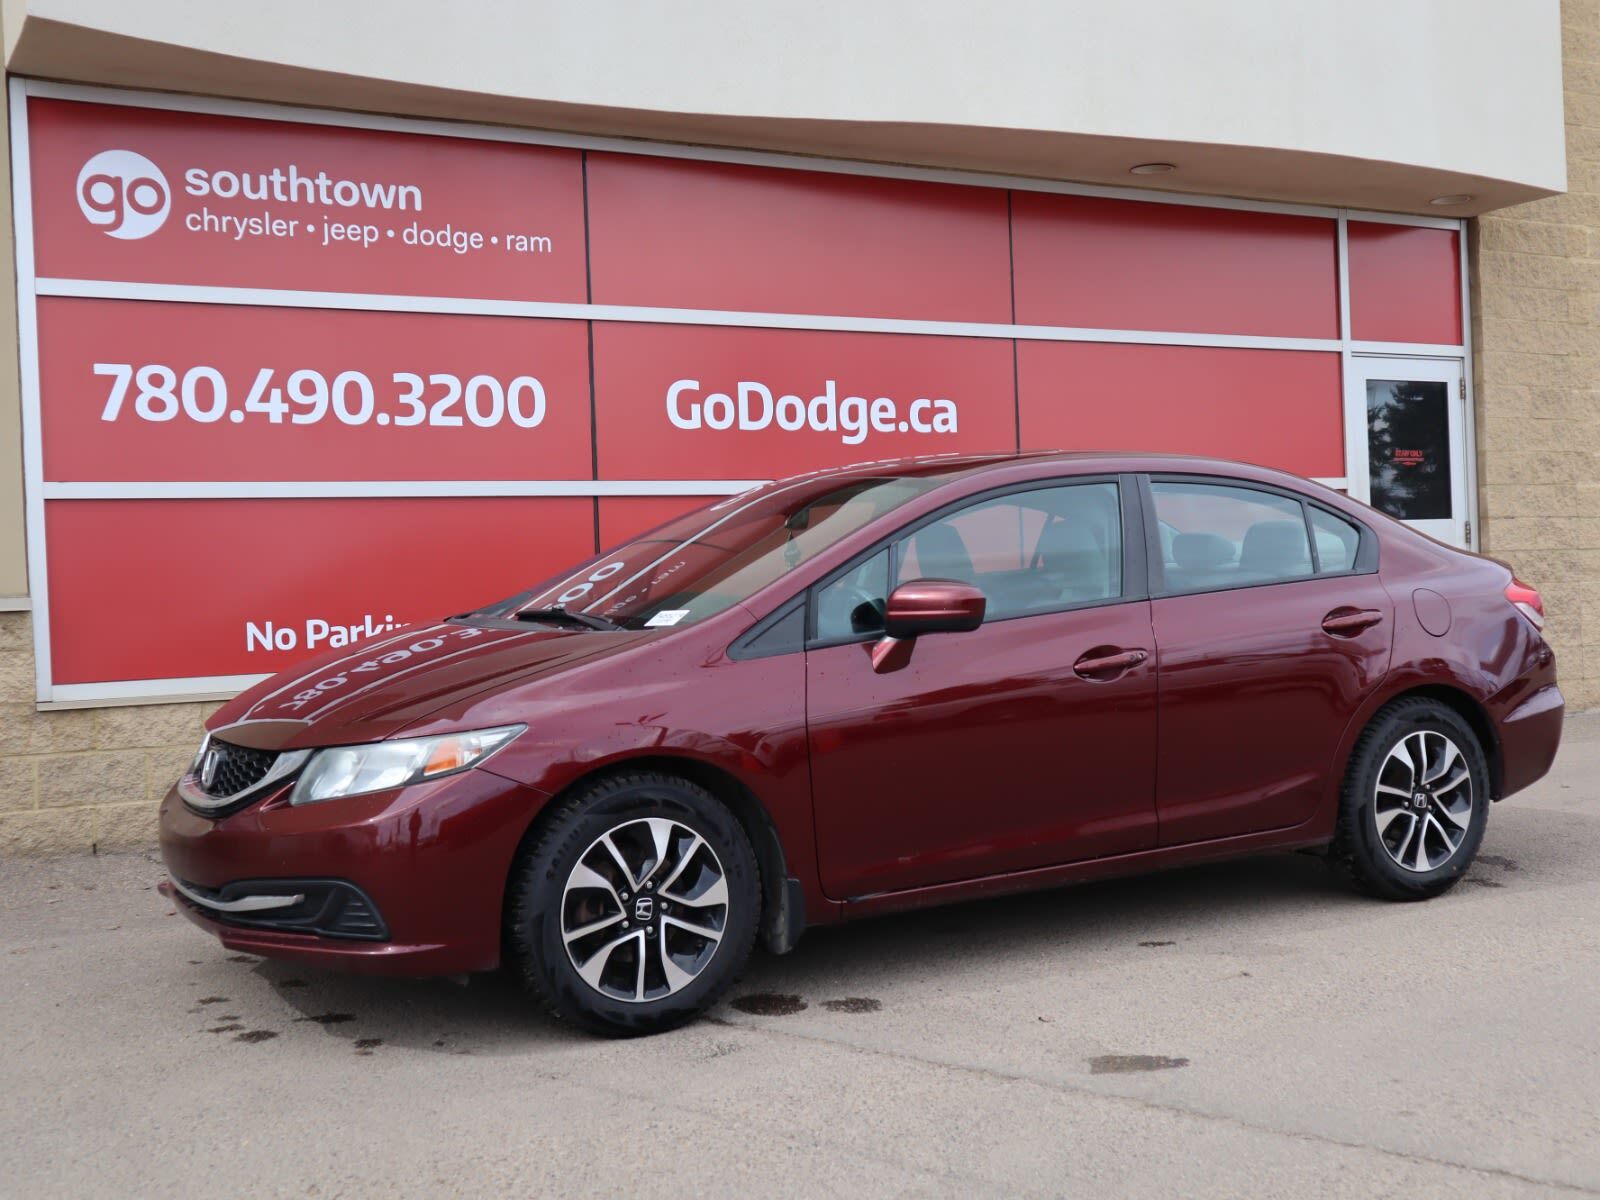 2014 Honda Civic Sedan EX IN RED EQUIPPED WITH A FUEL EFFICIENT 1.8L I4 ,